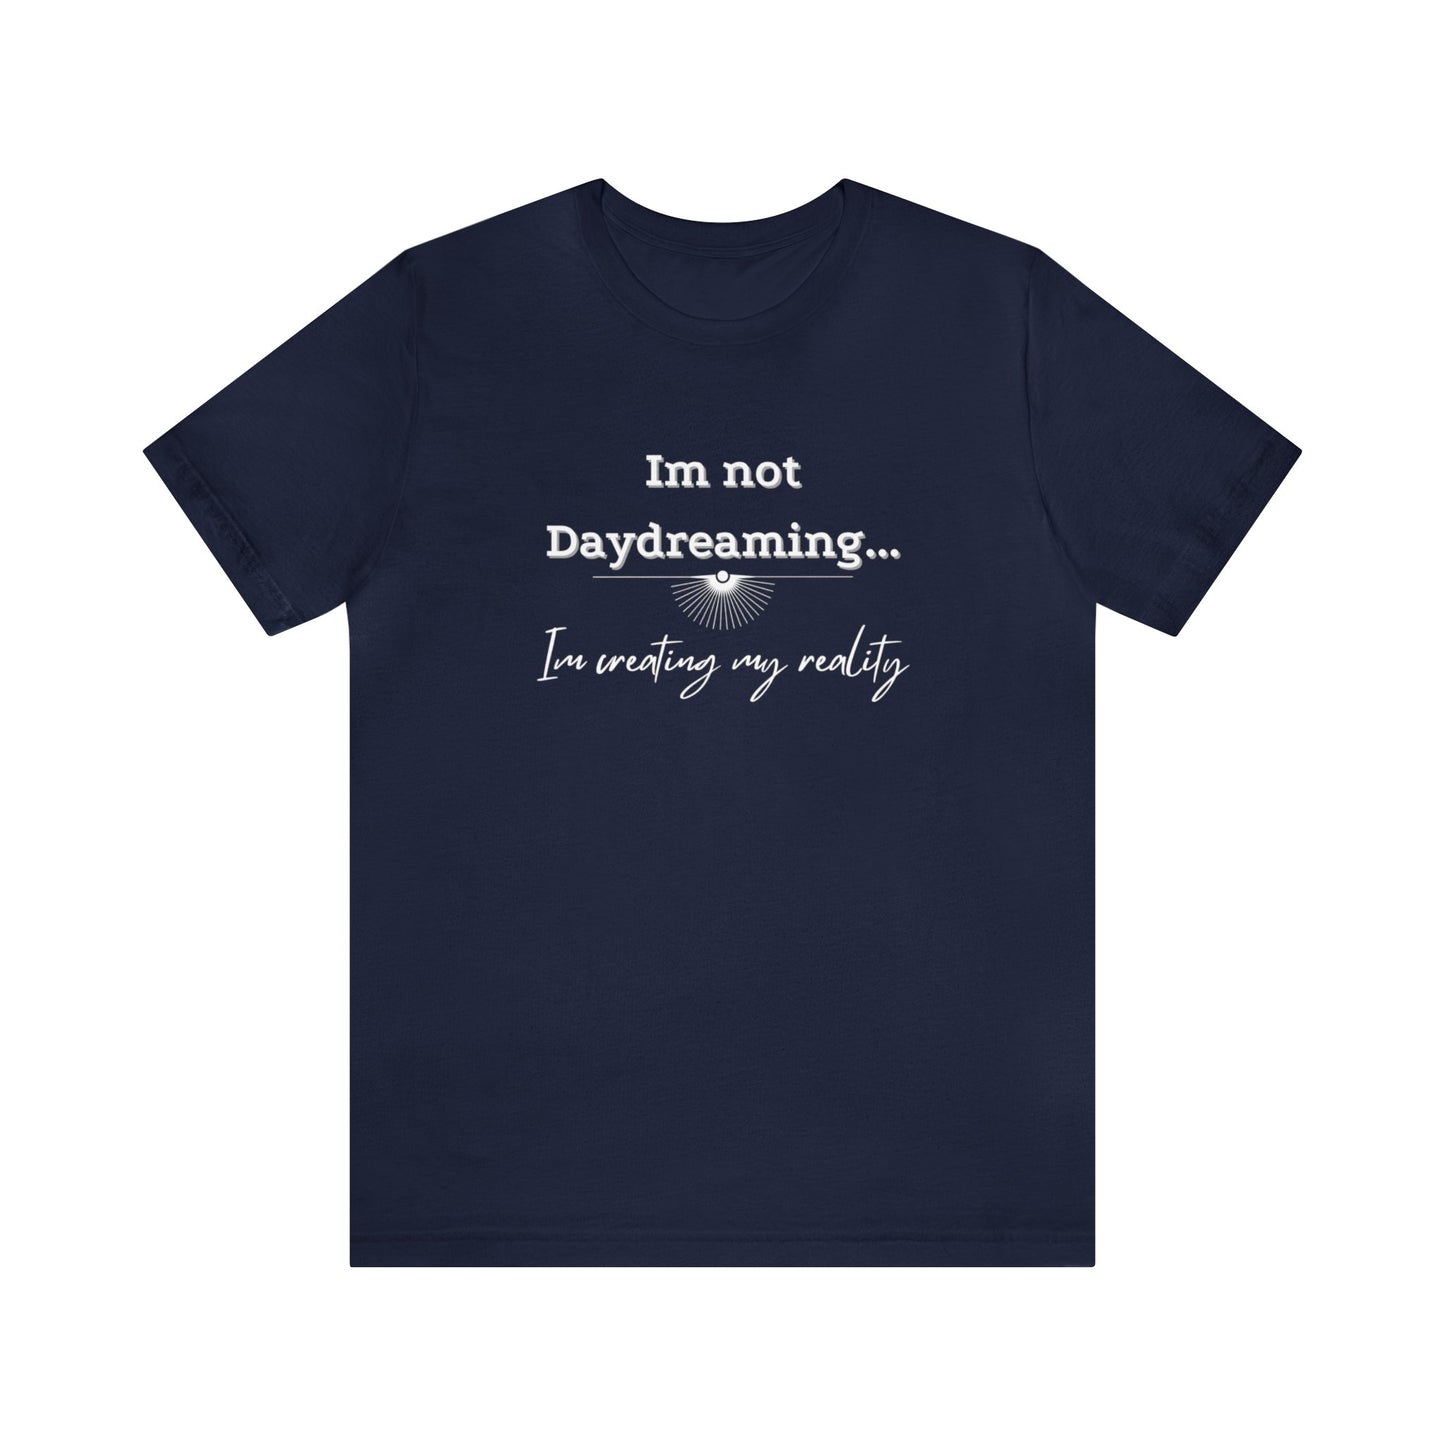 I'm not daydreaming I'm creating my reality! Inspirational jersey t shirt.